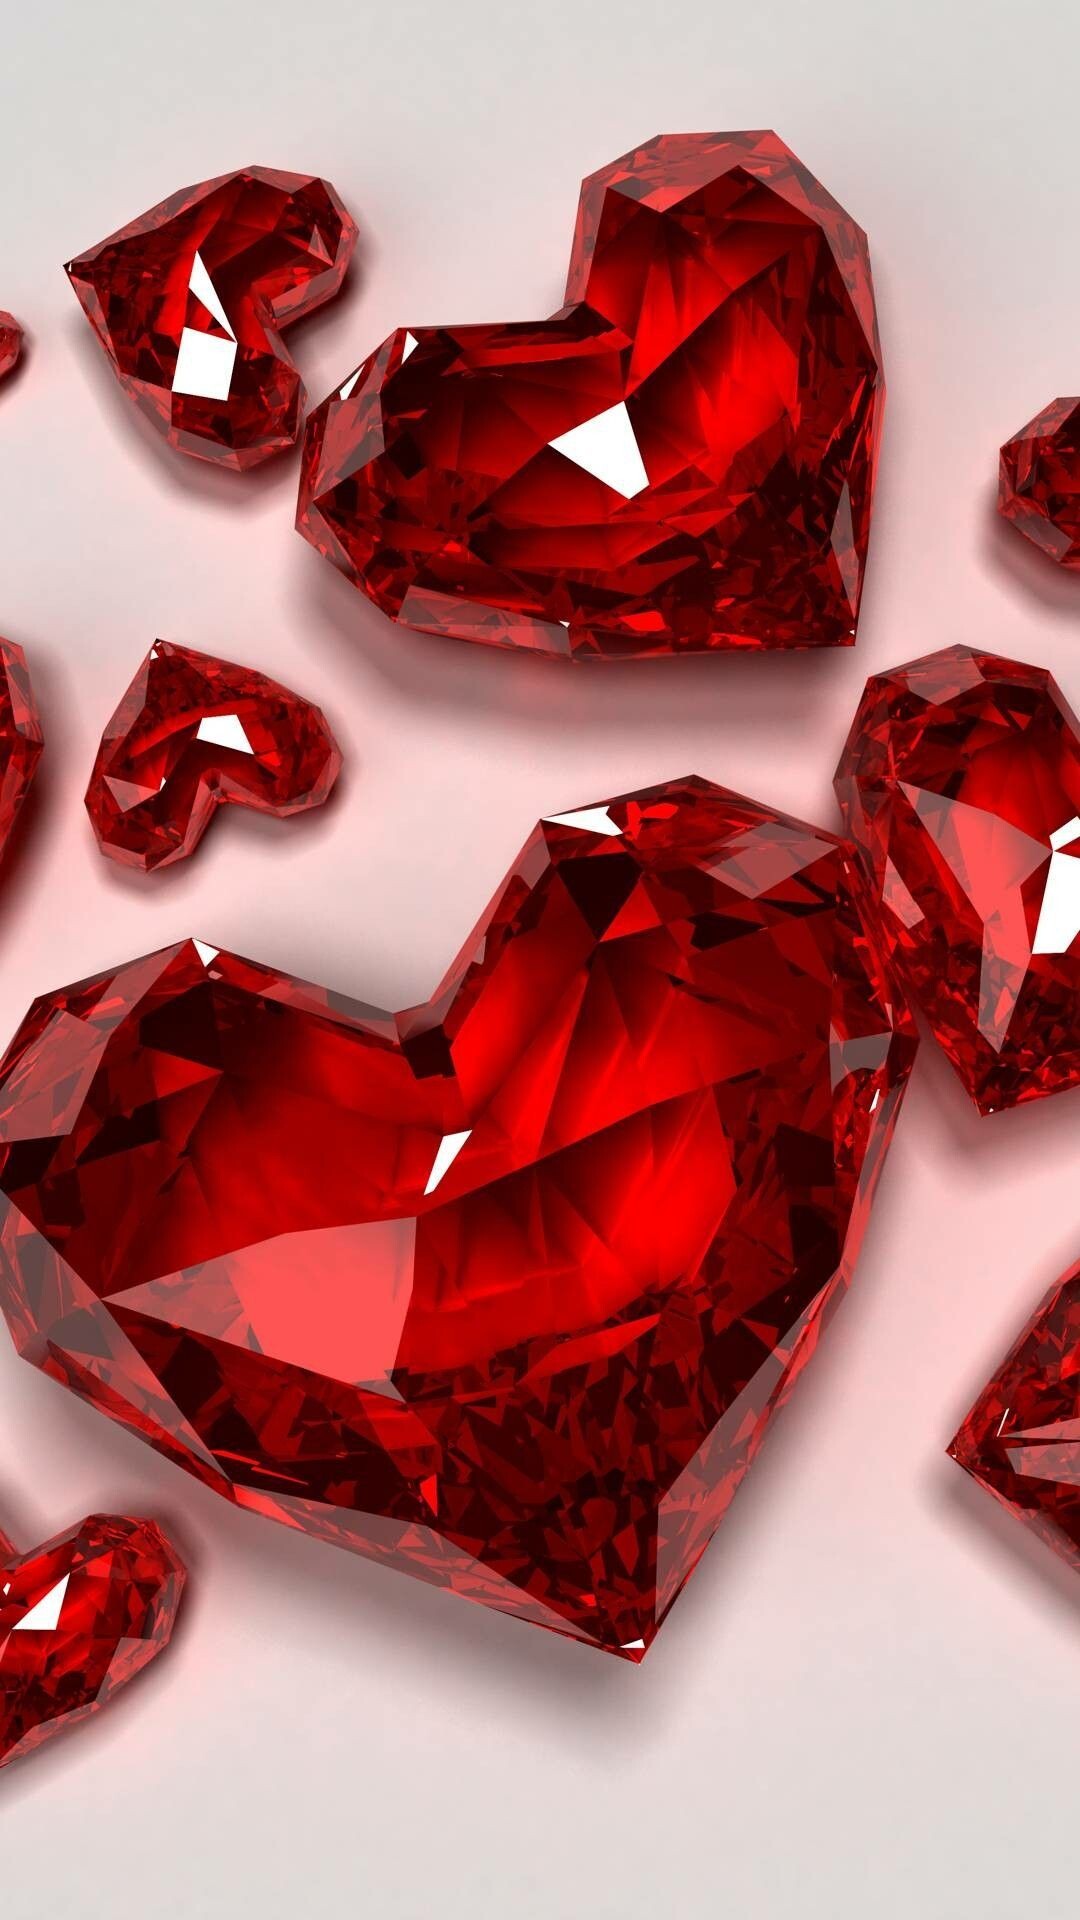 Gemstone: Ruby heart, A blood-red colored precious mineral of the mineral corundum. 1080x1920 Full HD Wallpaper.